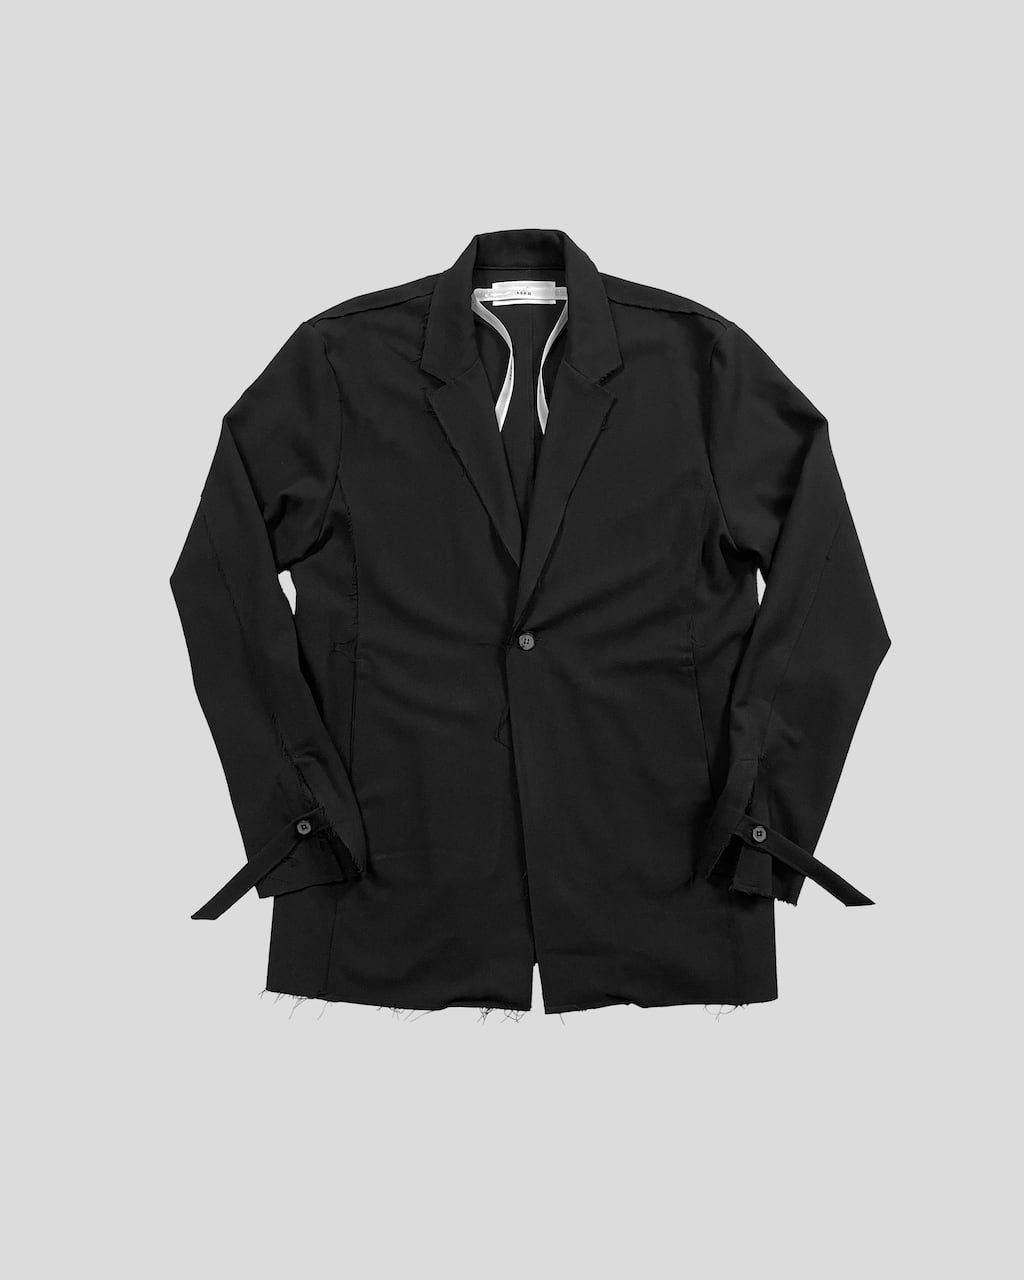 ASKYY TAILORED EASY JACKET BLK ASKYY TOKYO FLAGSHIP